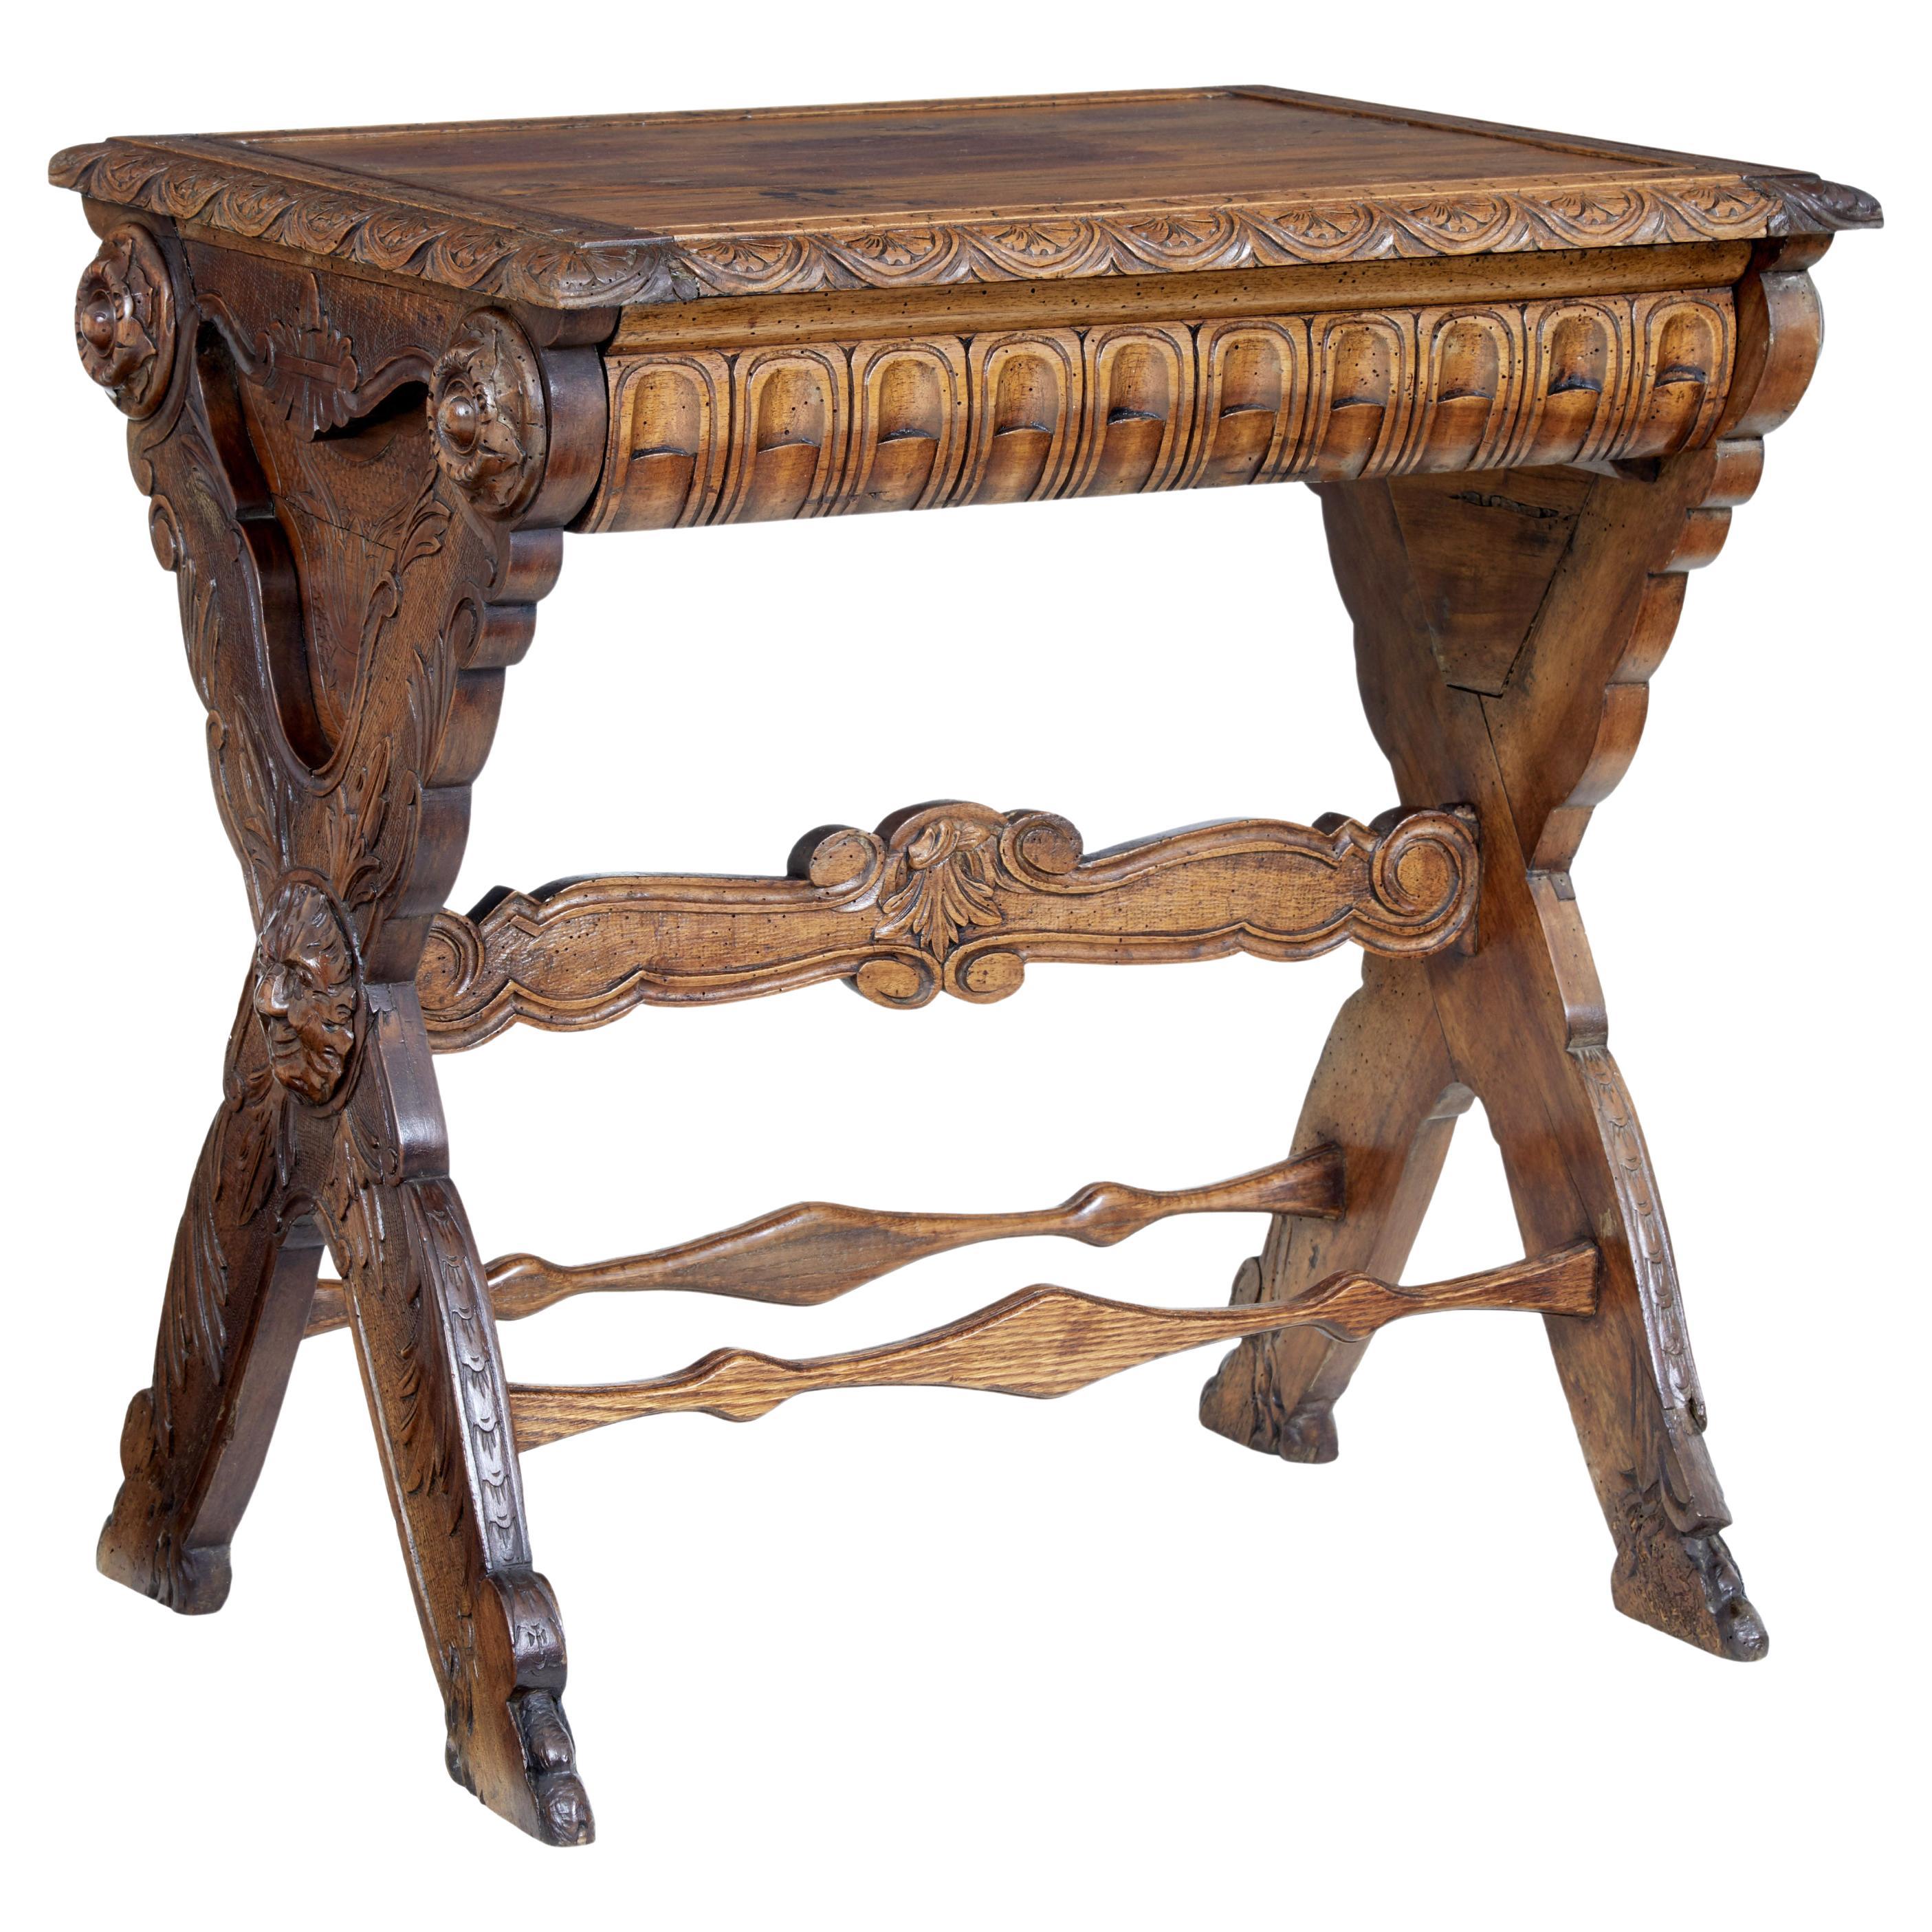 19th century carved Italian walnut and pine occasional table